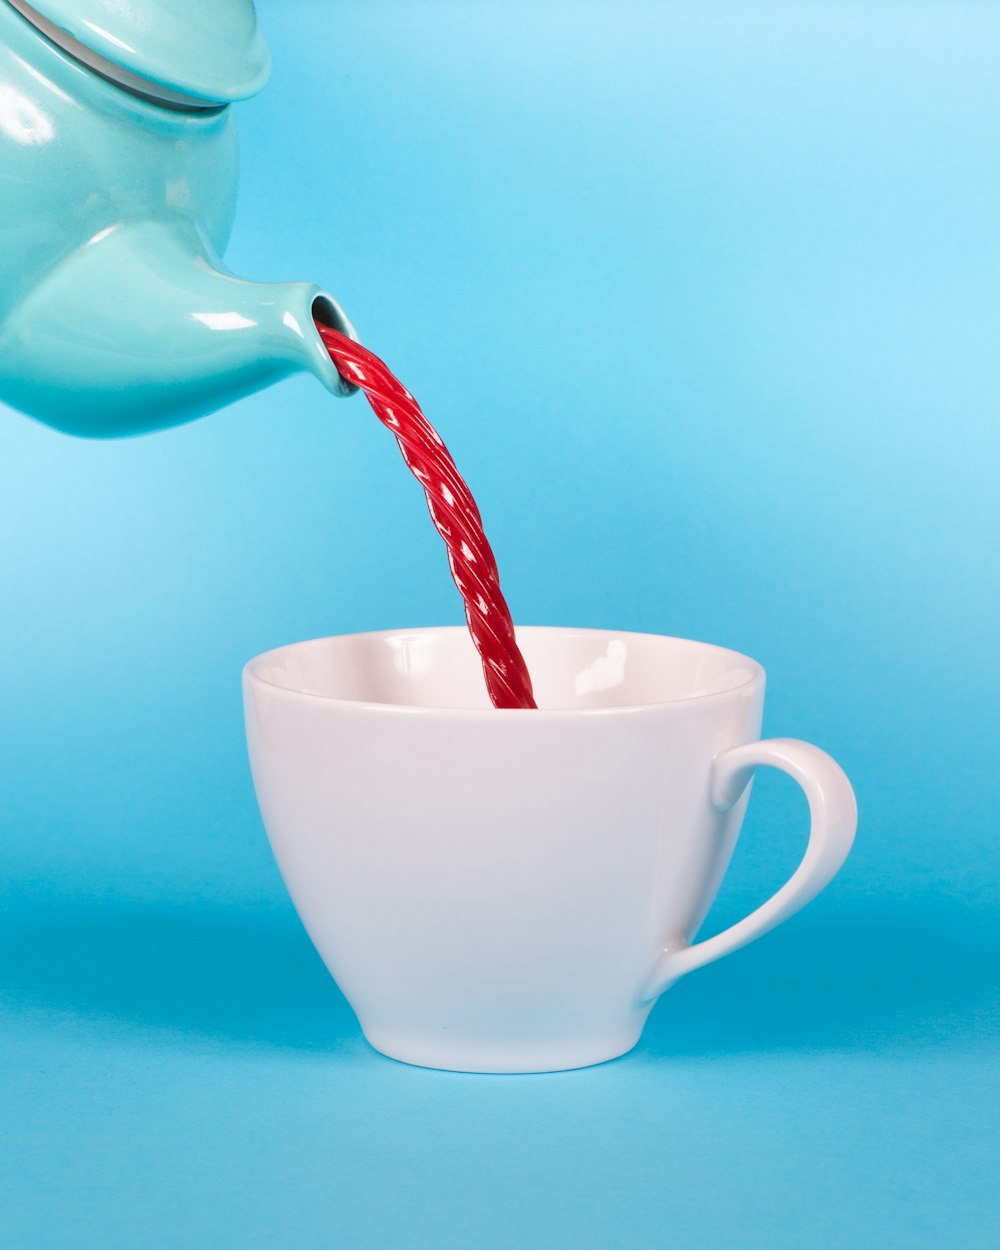 green teapot pouring red liquid to white teacup closeup photography